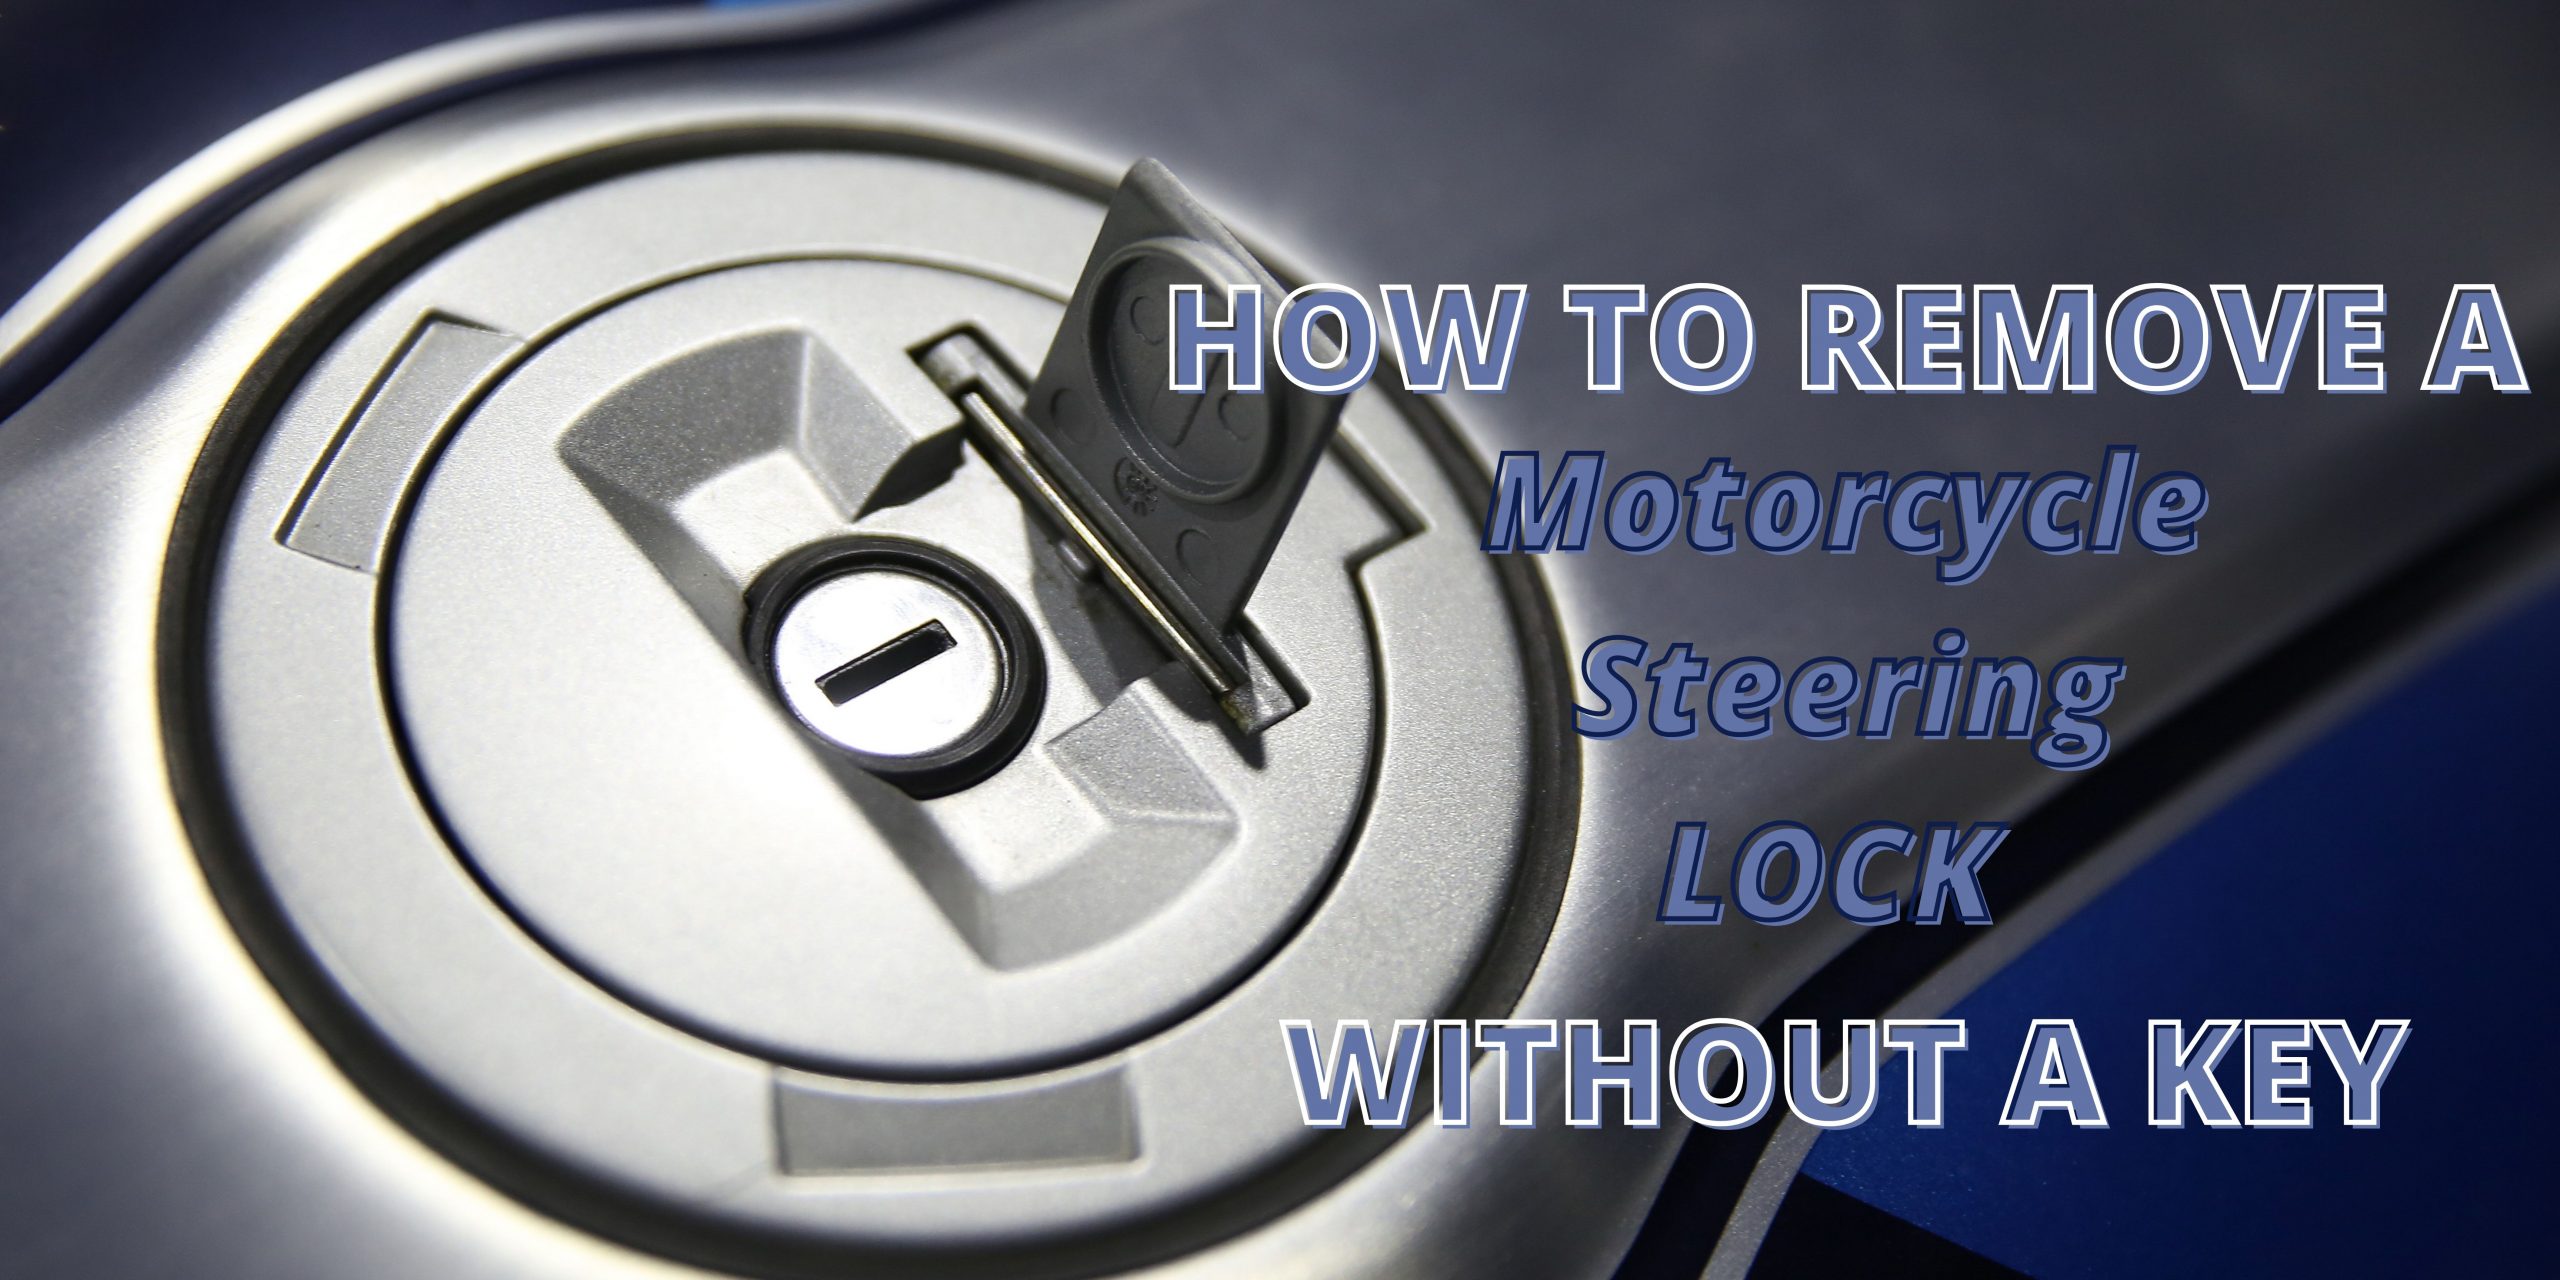 You are currently viewing How to Remove a Motorcycle Steering Lock Without a Key